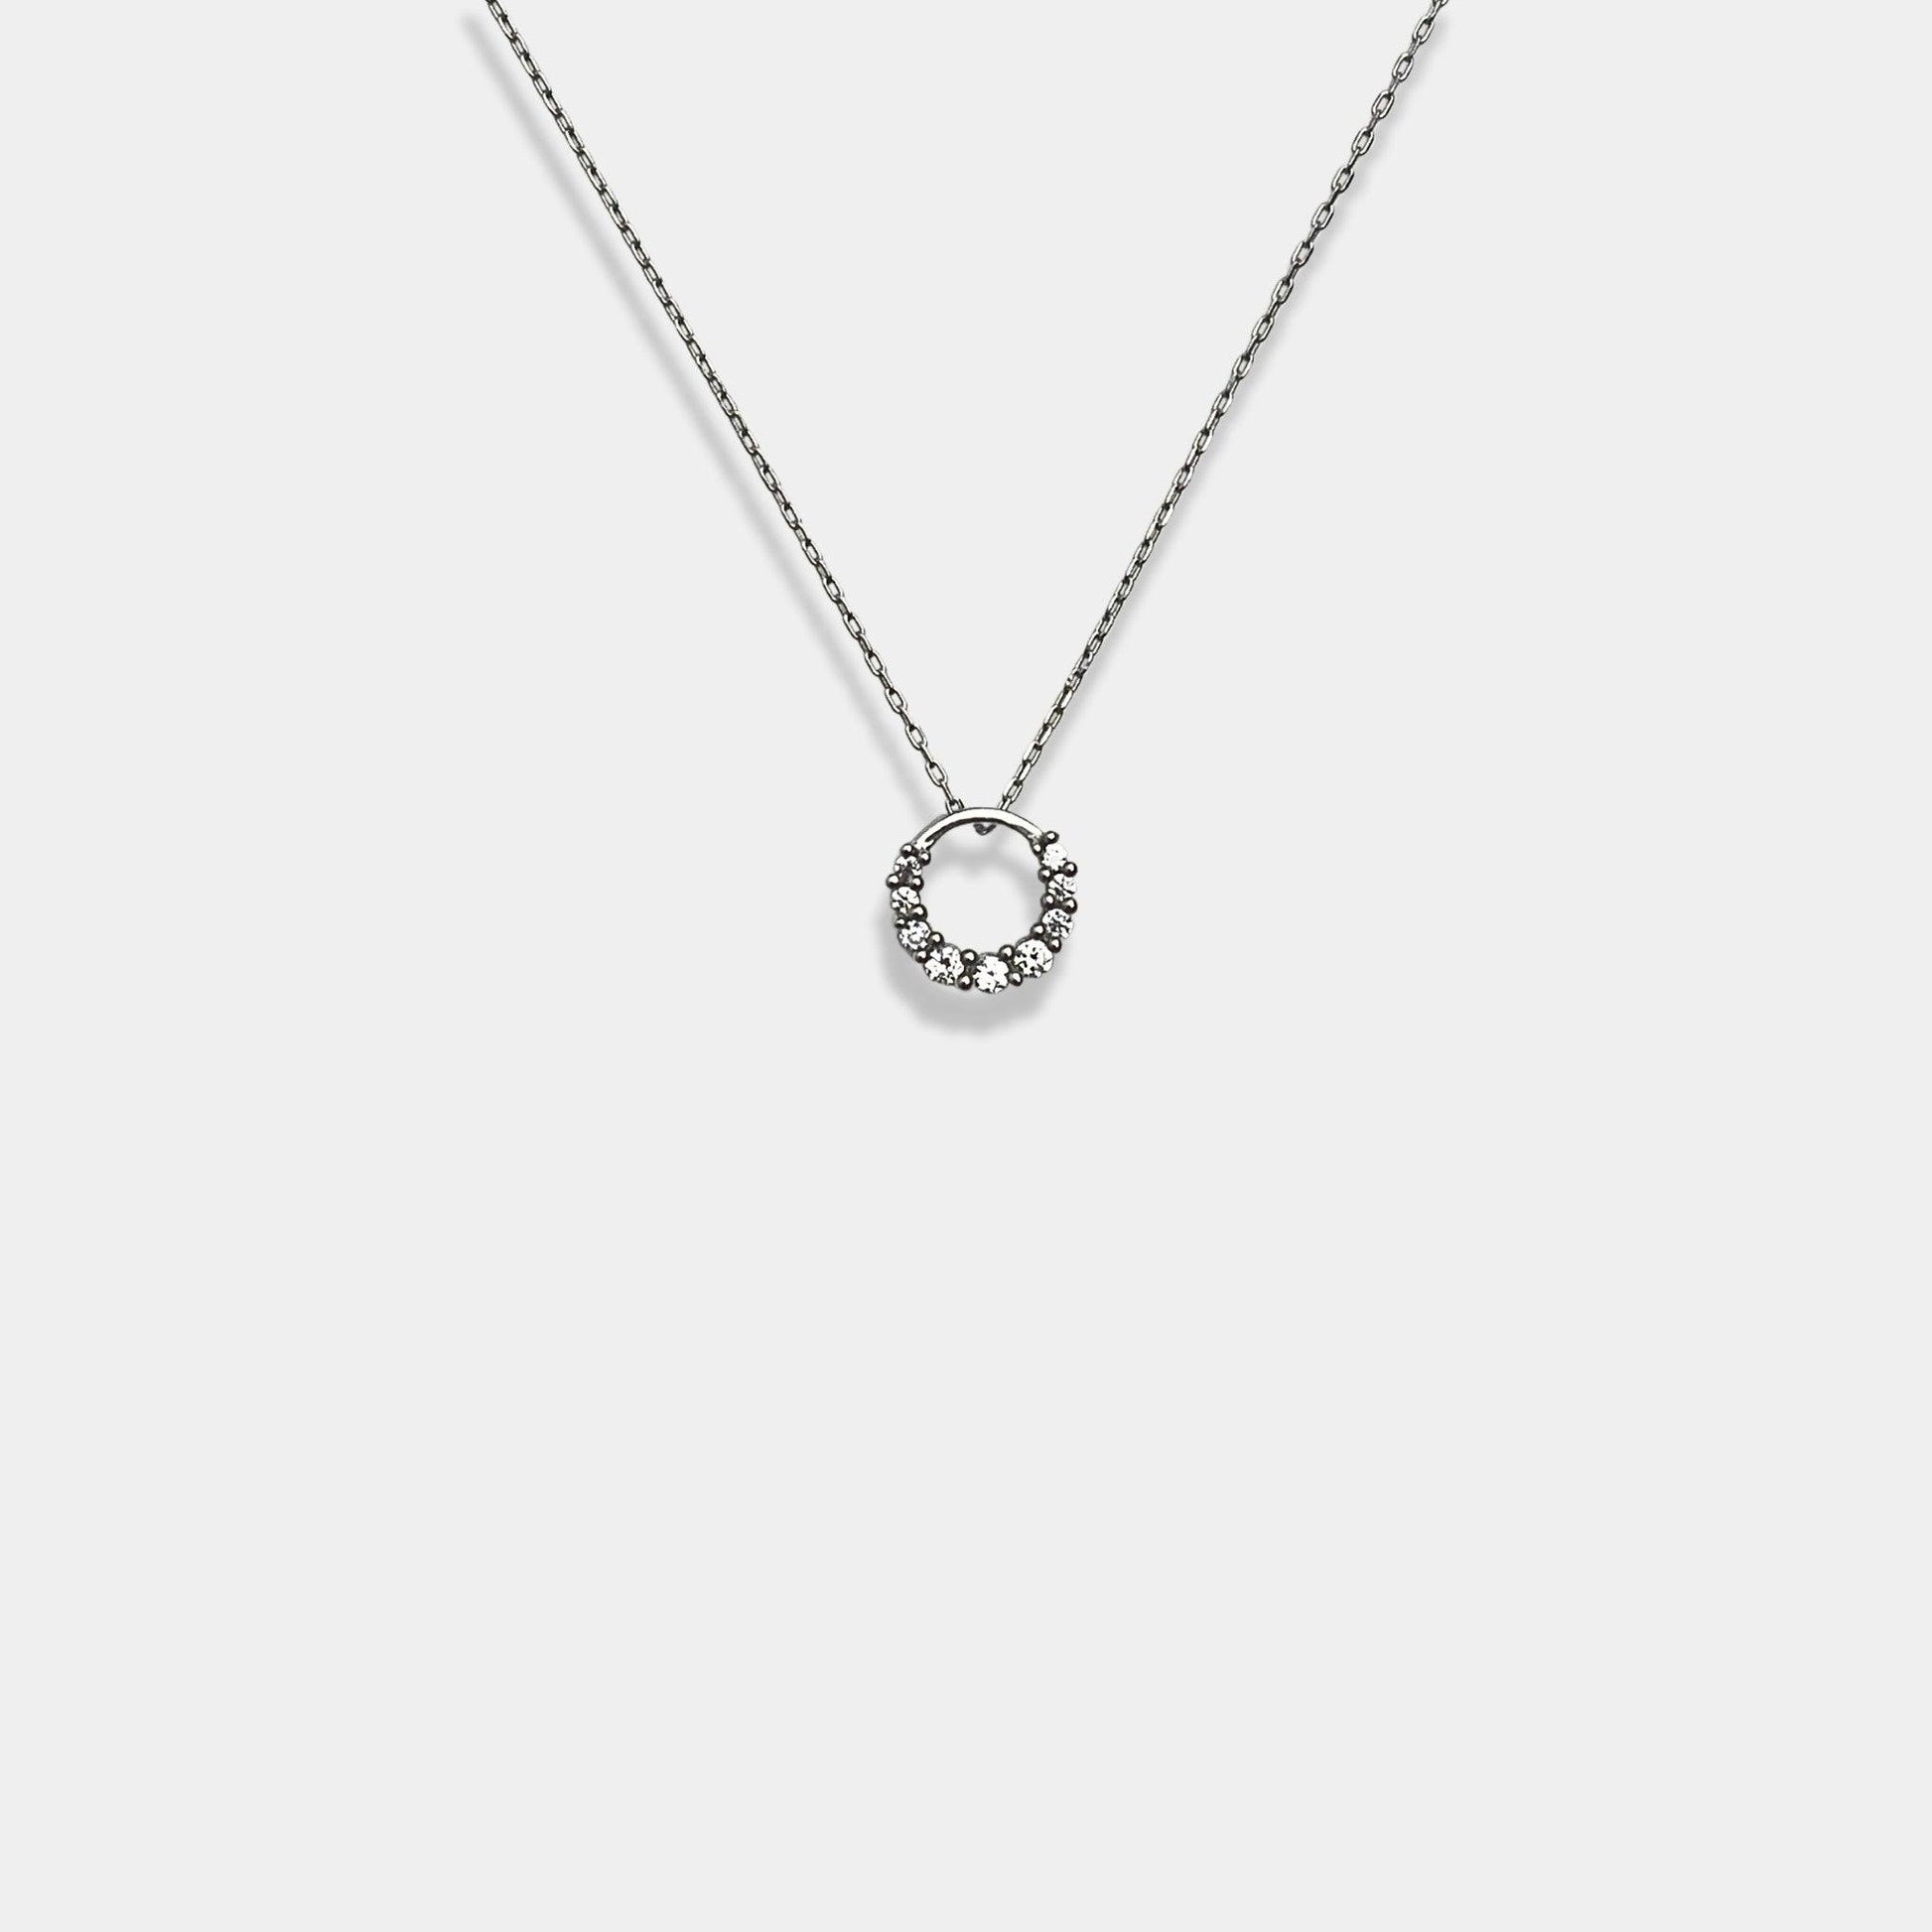 Discover elegance at its finest with our sterling silver necklace, adorned with a circle pendant that adds a touch of grace to any outfit.